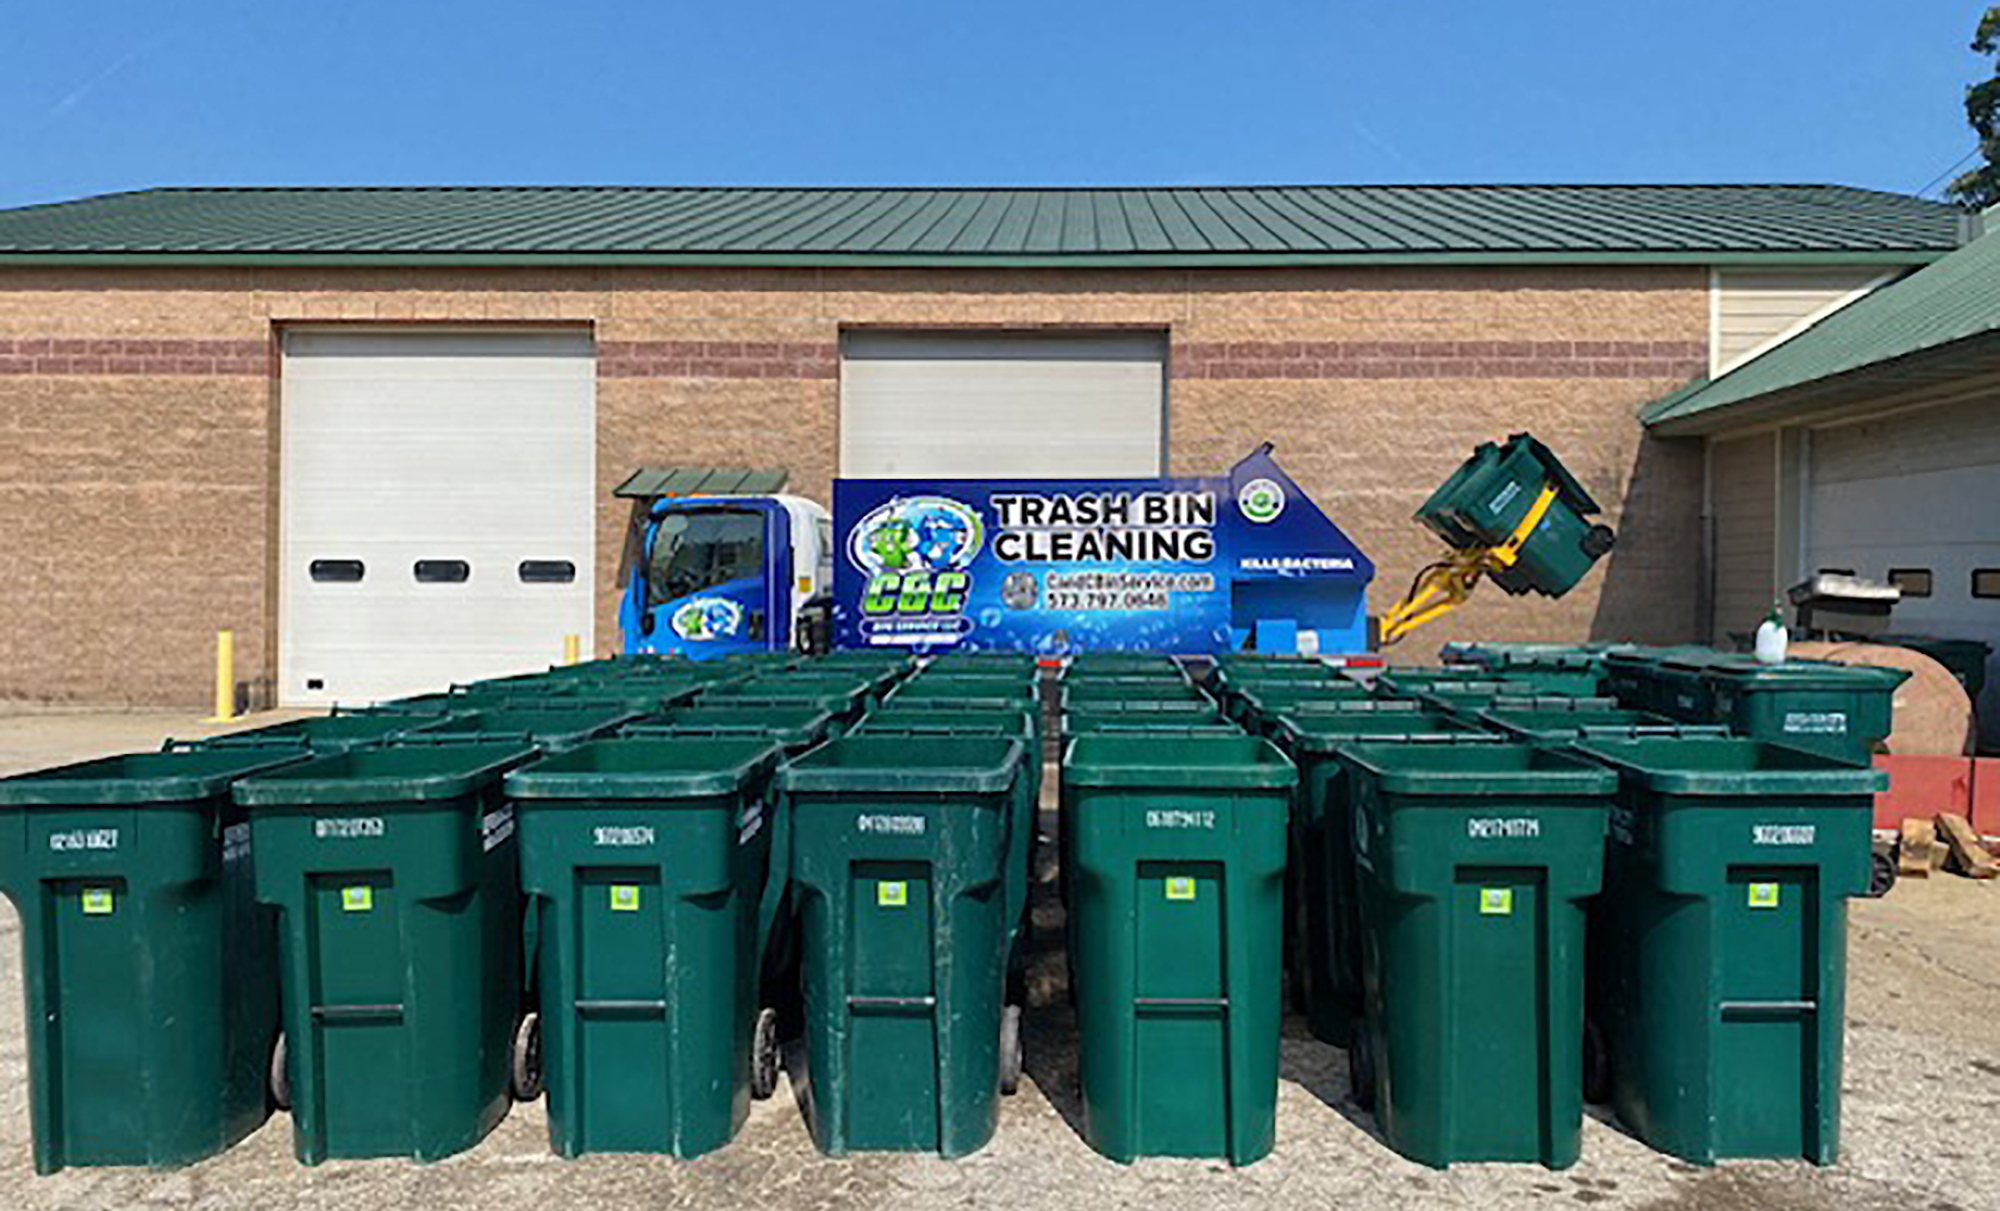 images/Jefferson-City-MO-Trash-Bin-Cleaning-Services.jpg